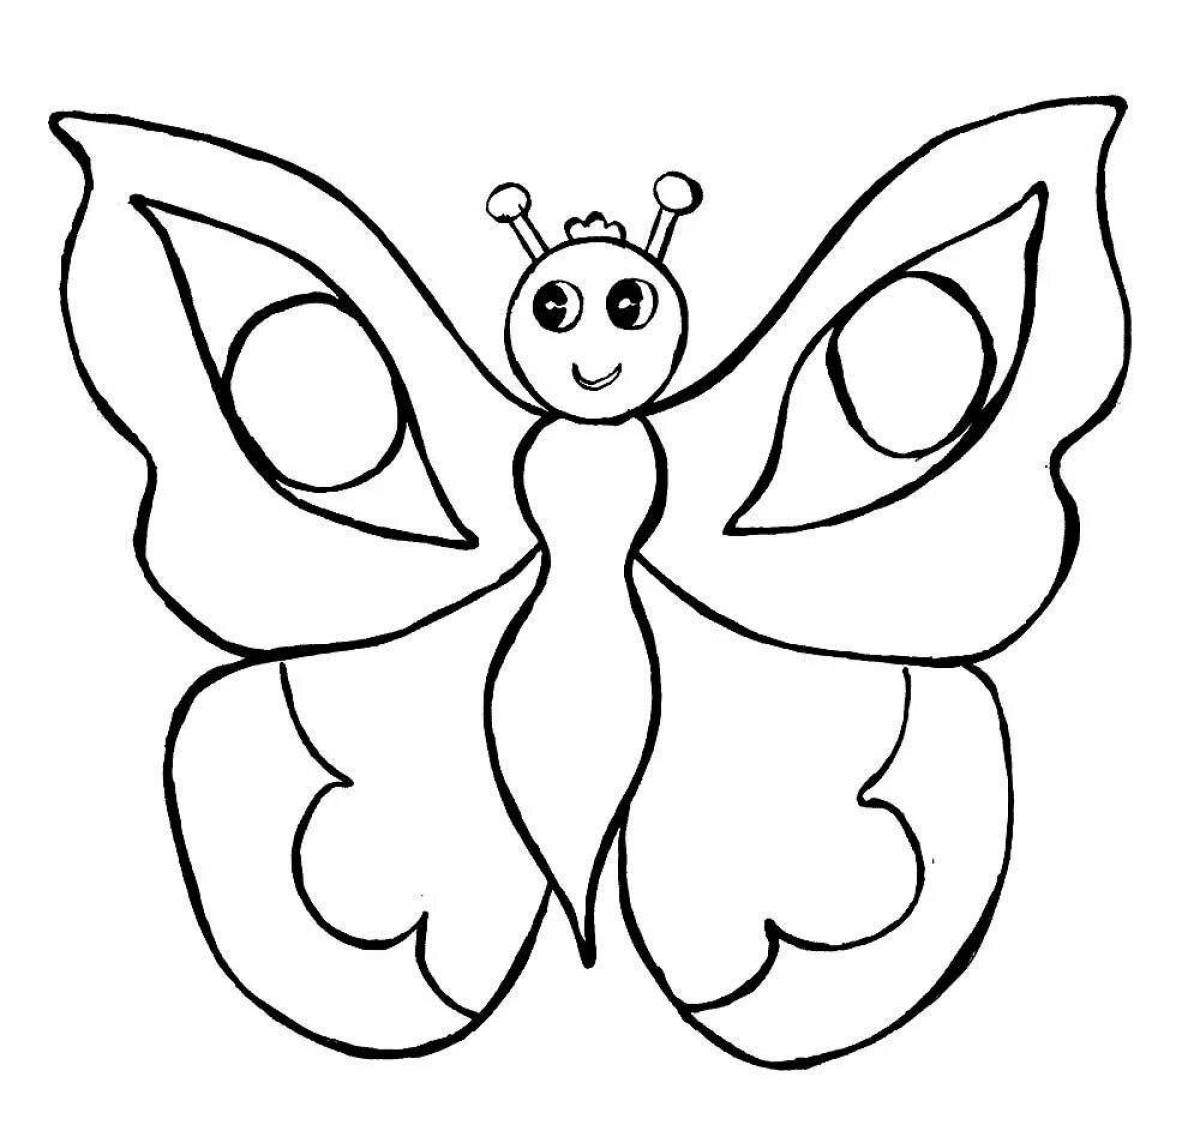 Incredible butterfly outline coloring book